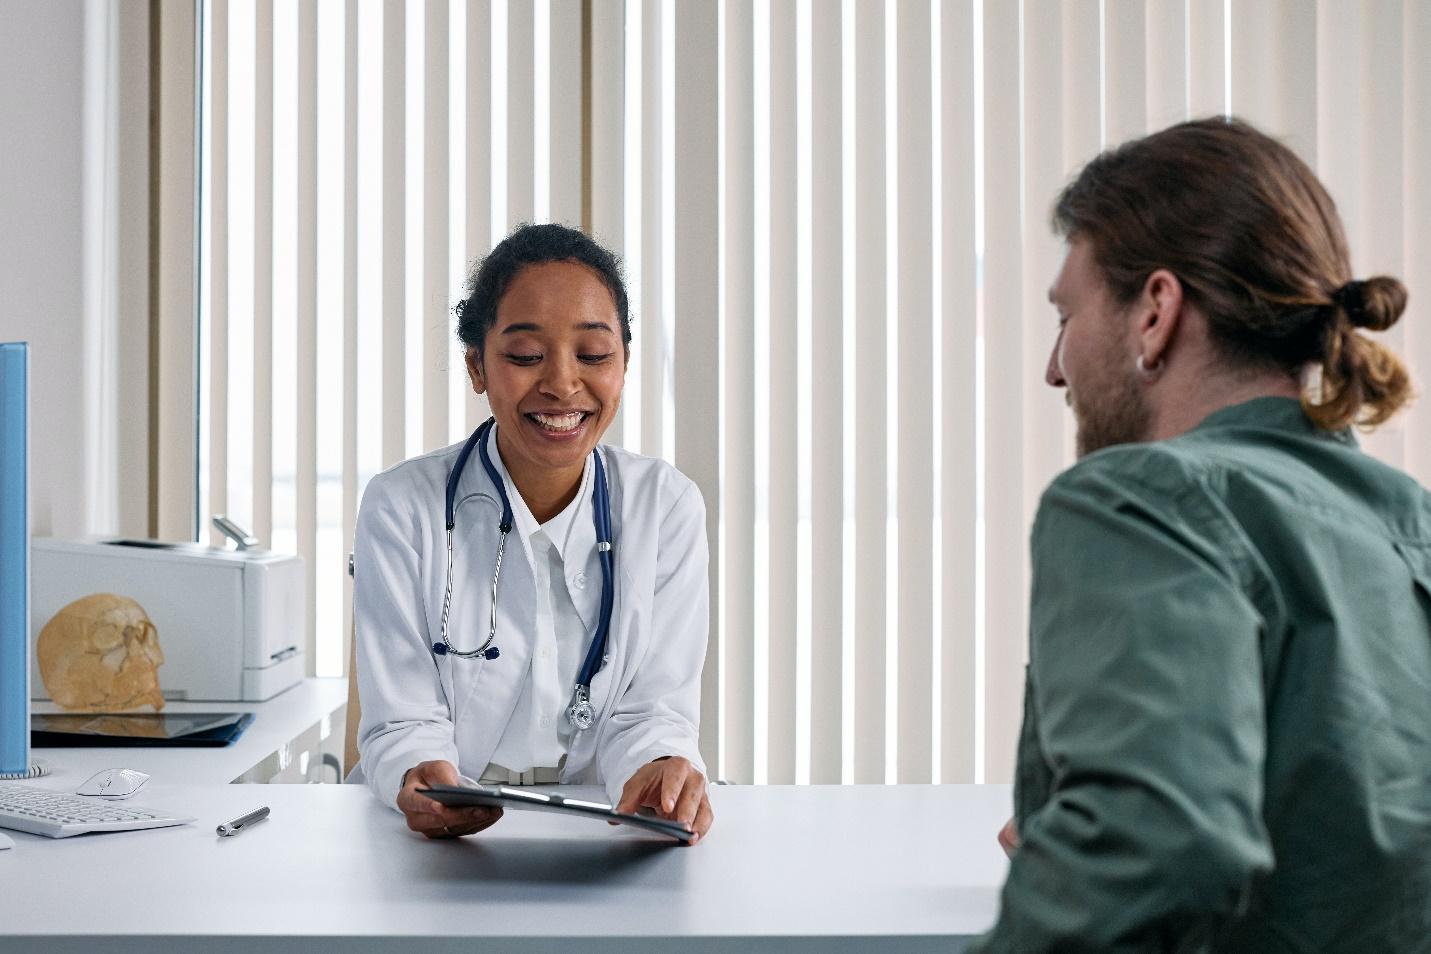 9 Ways To Get The Most Out Of Your Doctor’s Visit